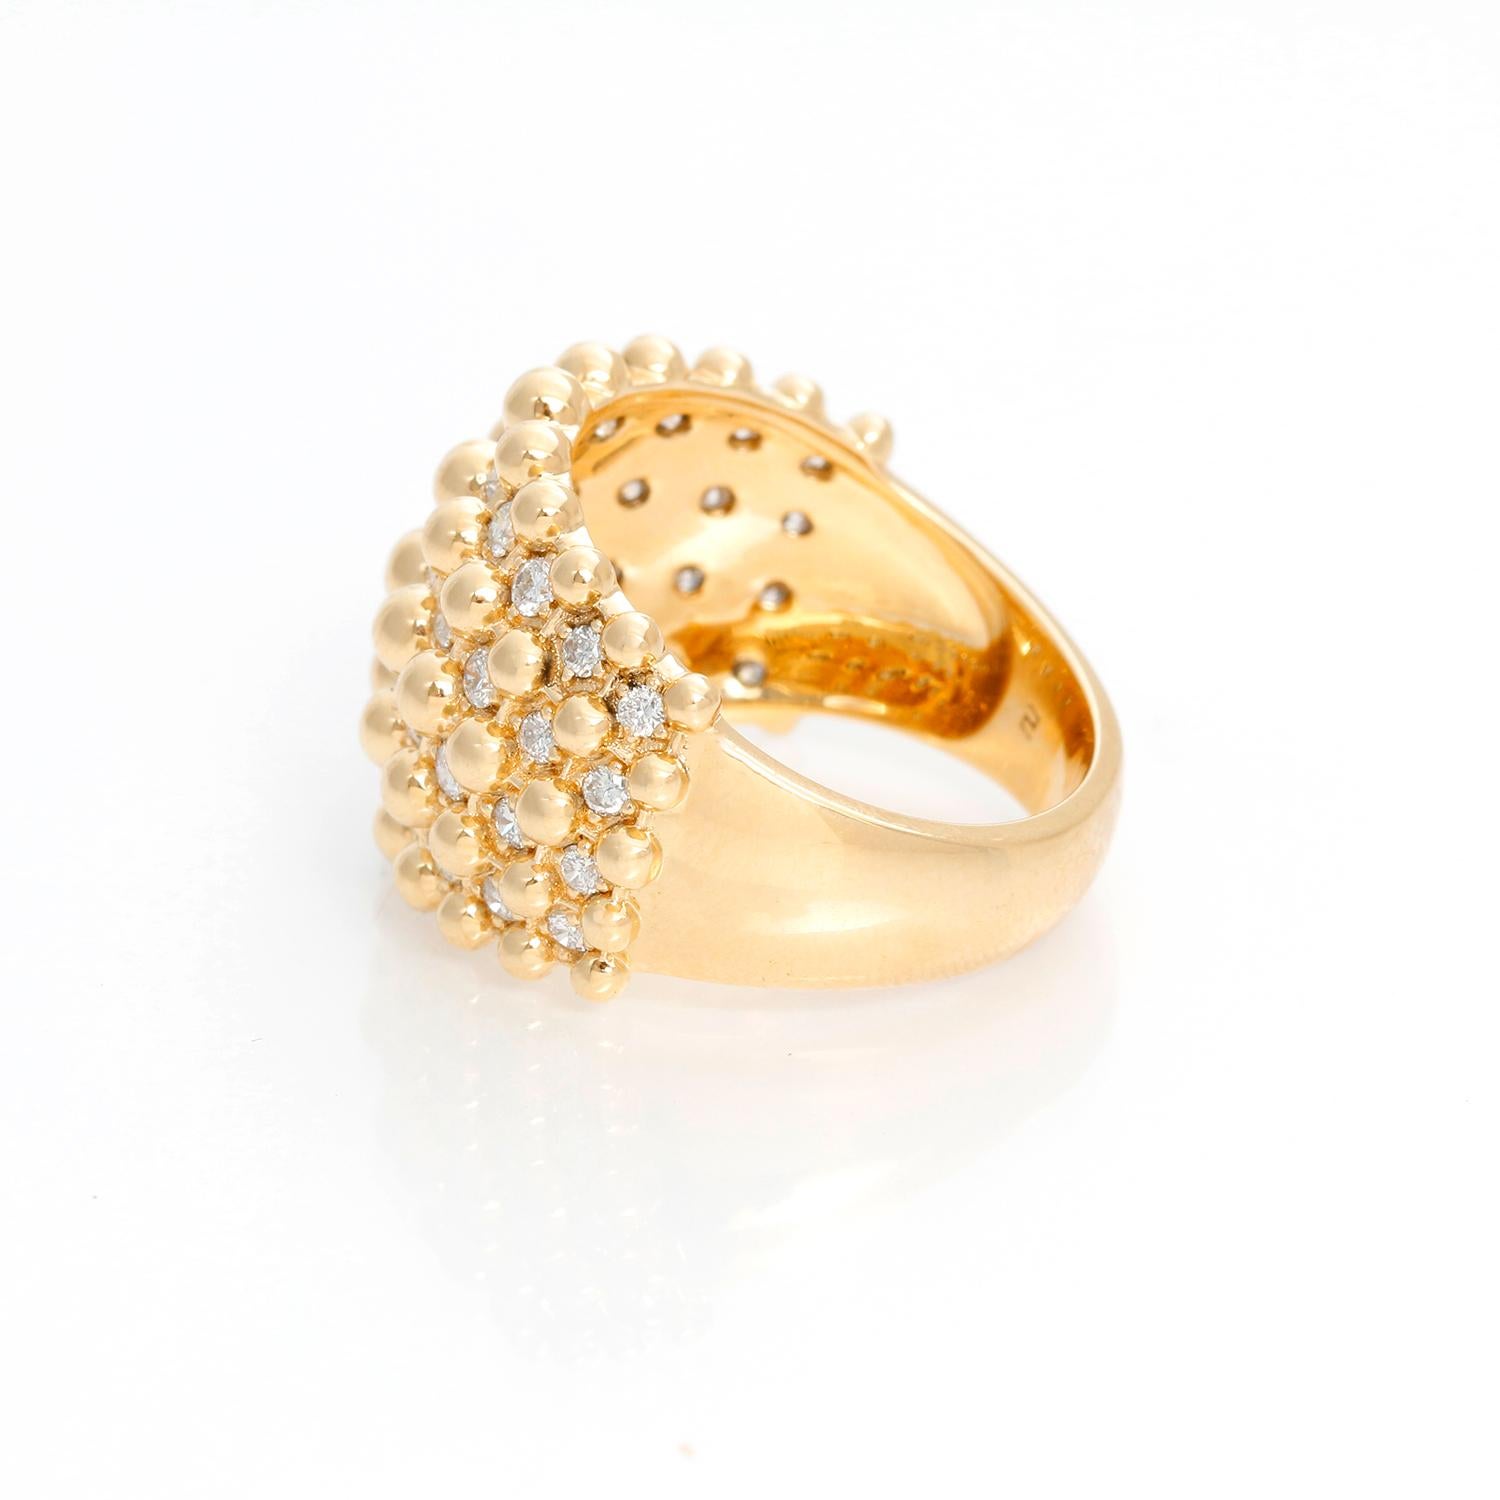 Diamond and Gold Bead 18K Yellow Gold Ring Size 7.5 - 18K Yellow gold polished bead ring. Featuring 1 ct of diamonds. Size 7 .5 Total weight 11.6 grams. 
This ring is easy to wear with everything on your middle finger. 